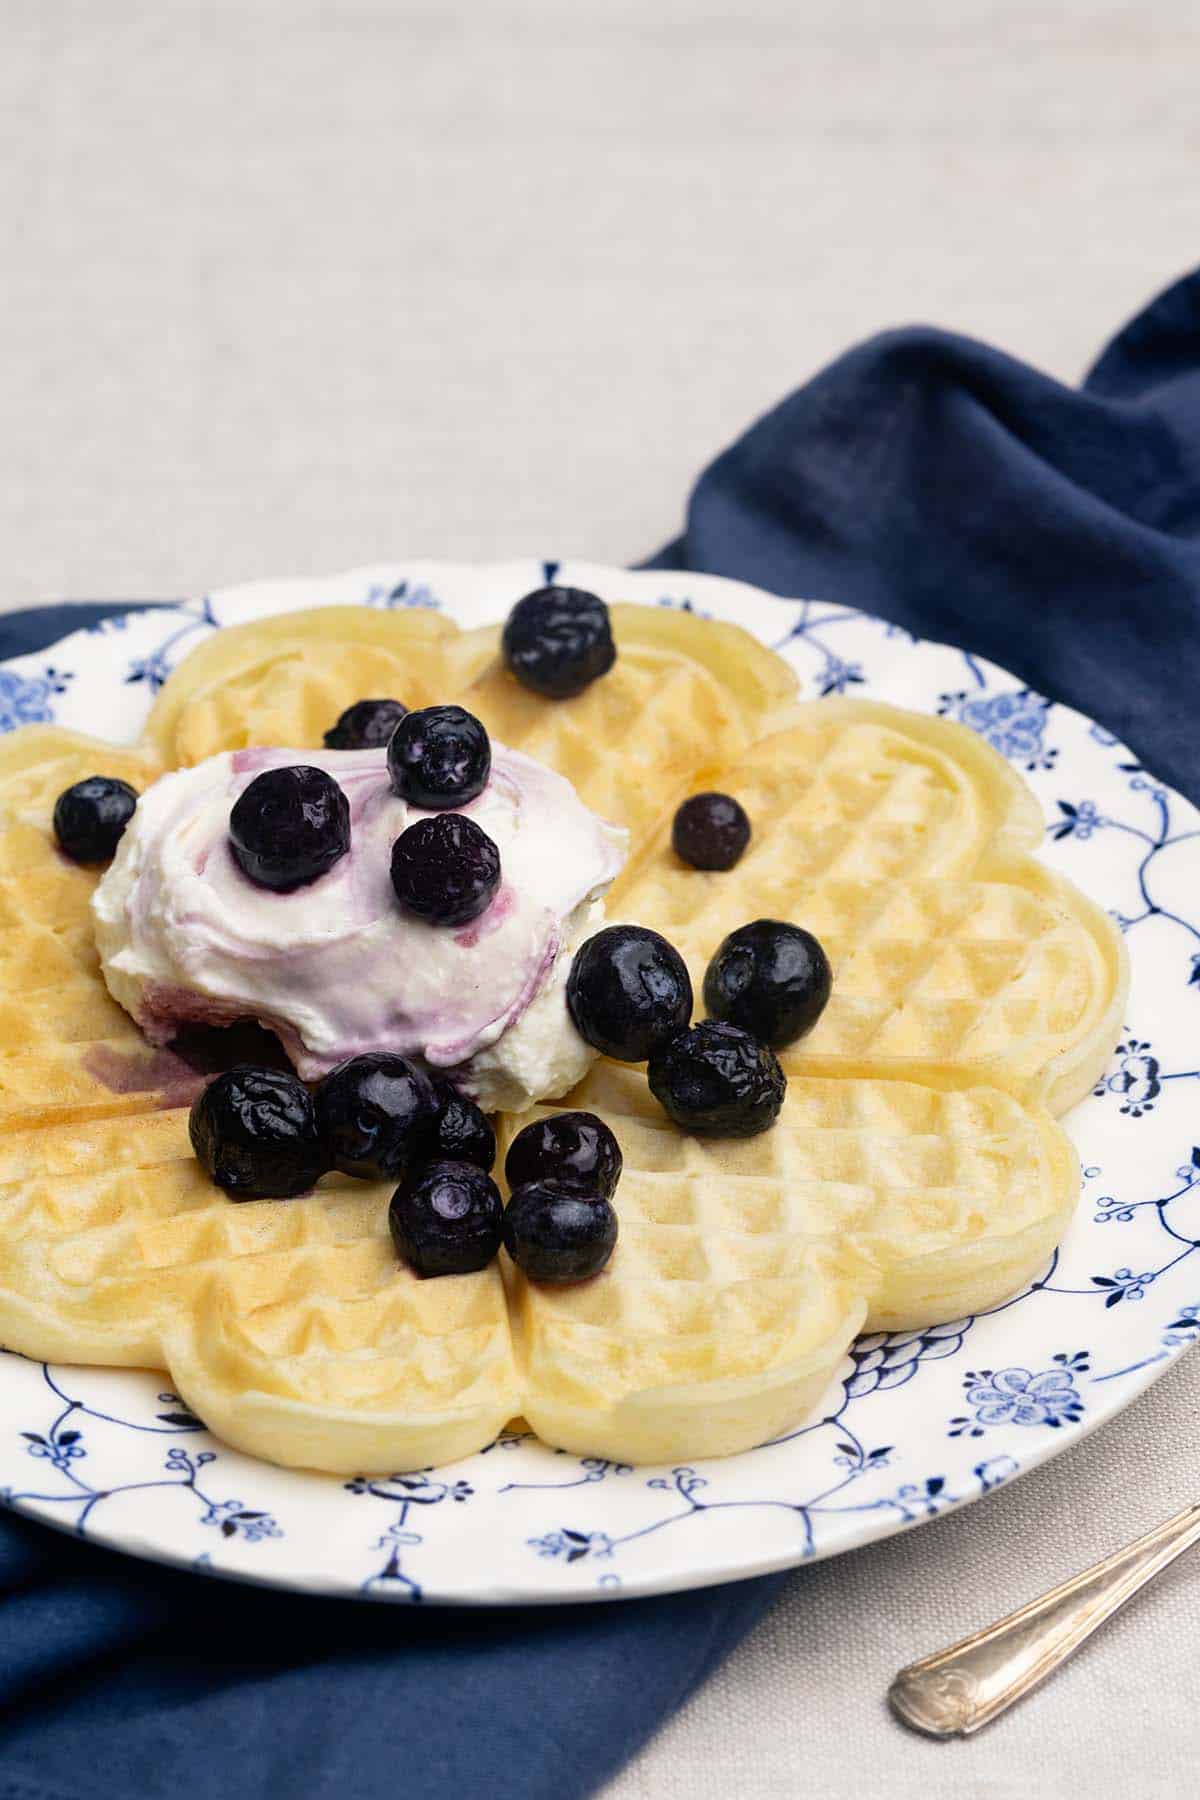 A whey waffle on a patterned plate with Greek yogurt and blueberries.